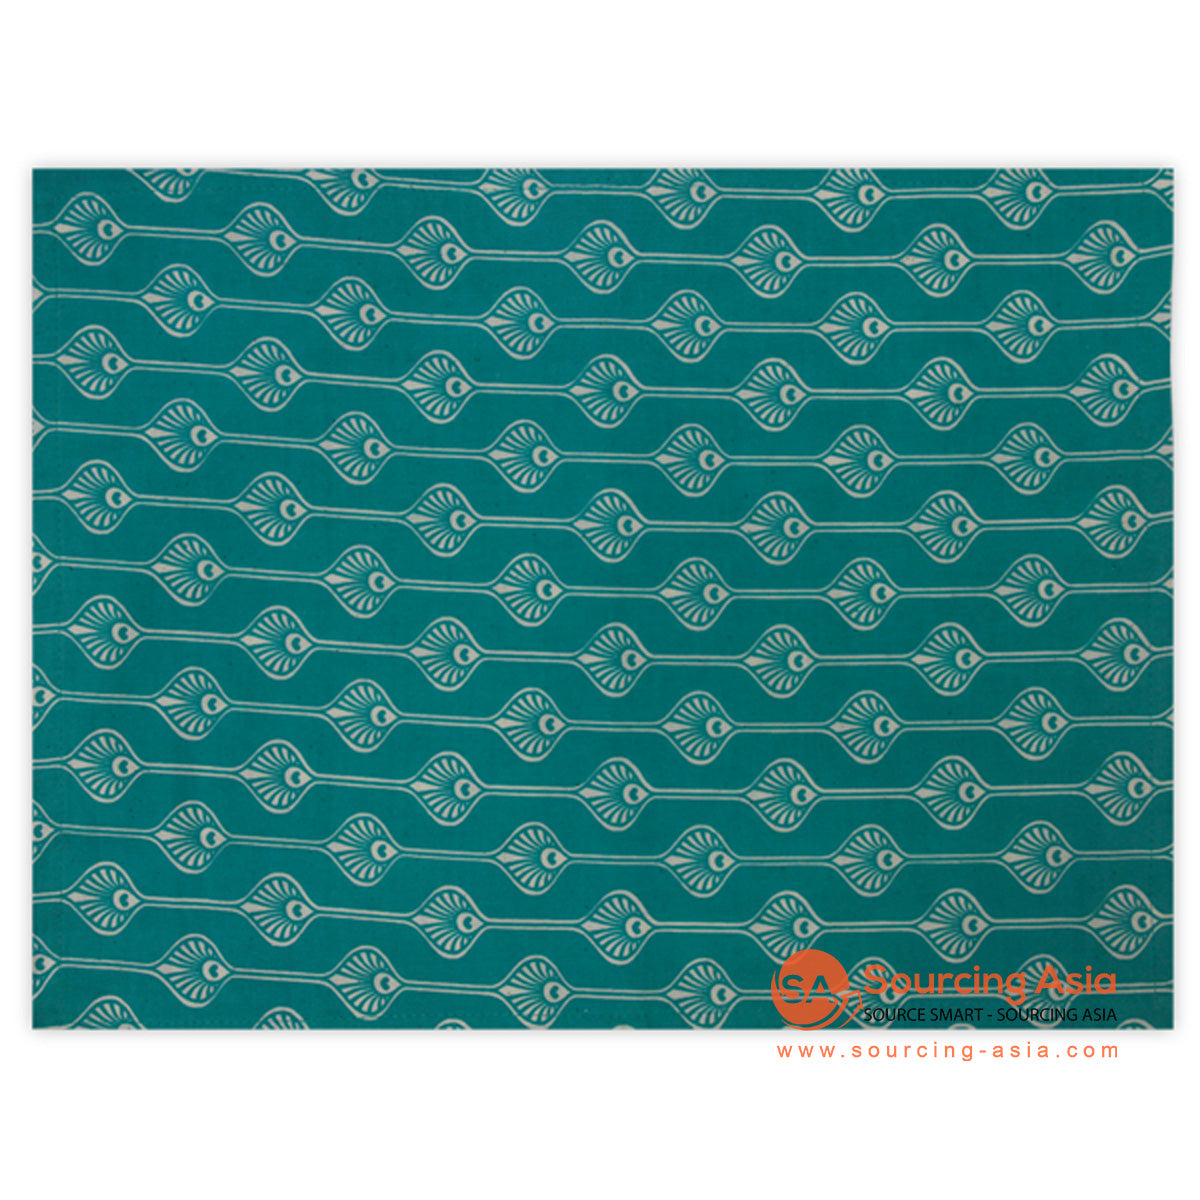 BZN023 SET OF FOUR TEAL PEACOCK PRINTED COTTON PLACEMATS